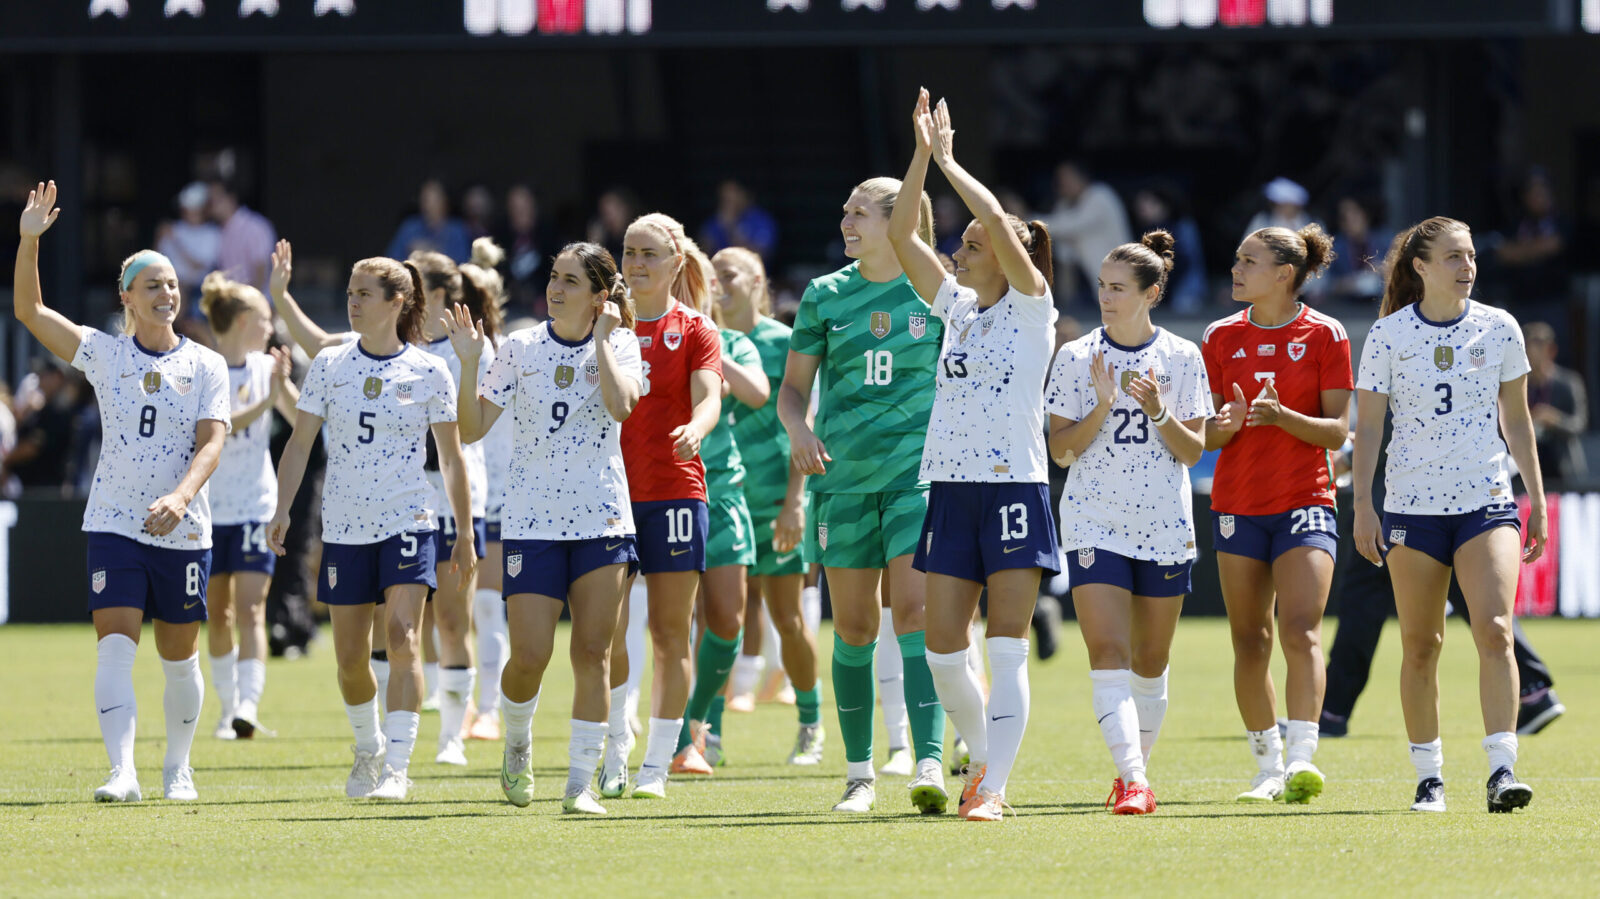 The United States team celebrates a win against Wales during a FIFA Women's World Cup send-off socc...